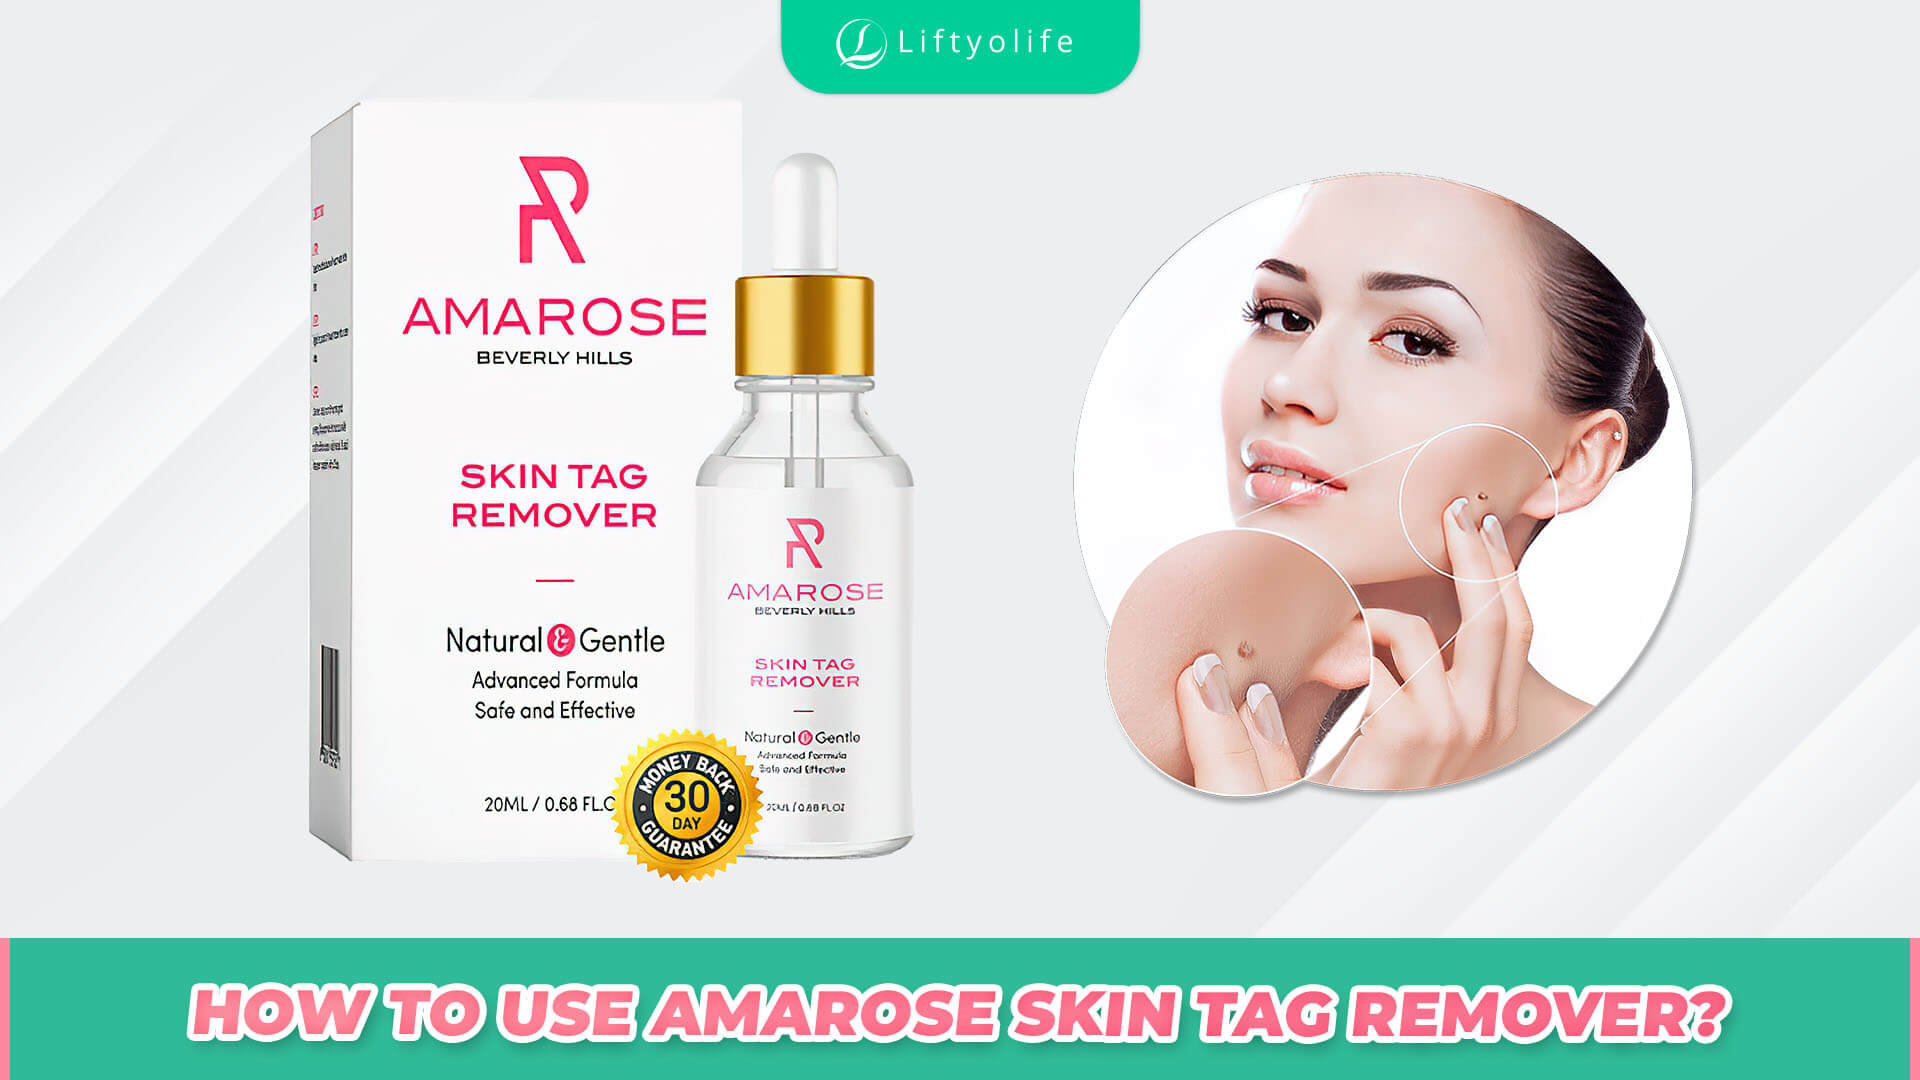 How To Use Amarose Skin Tag Remover